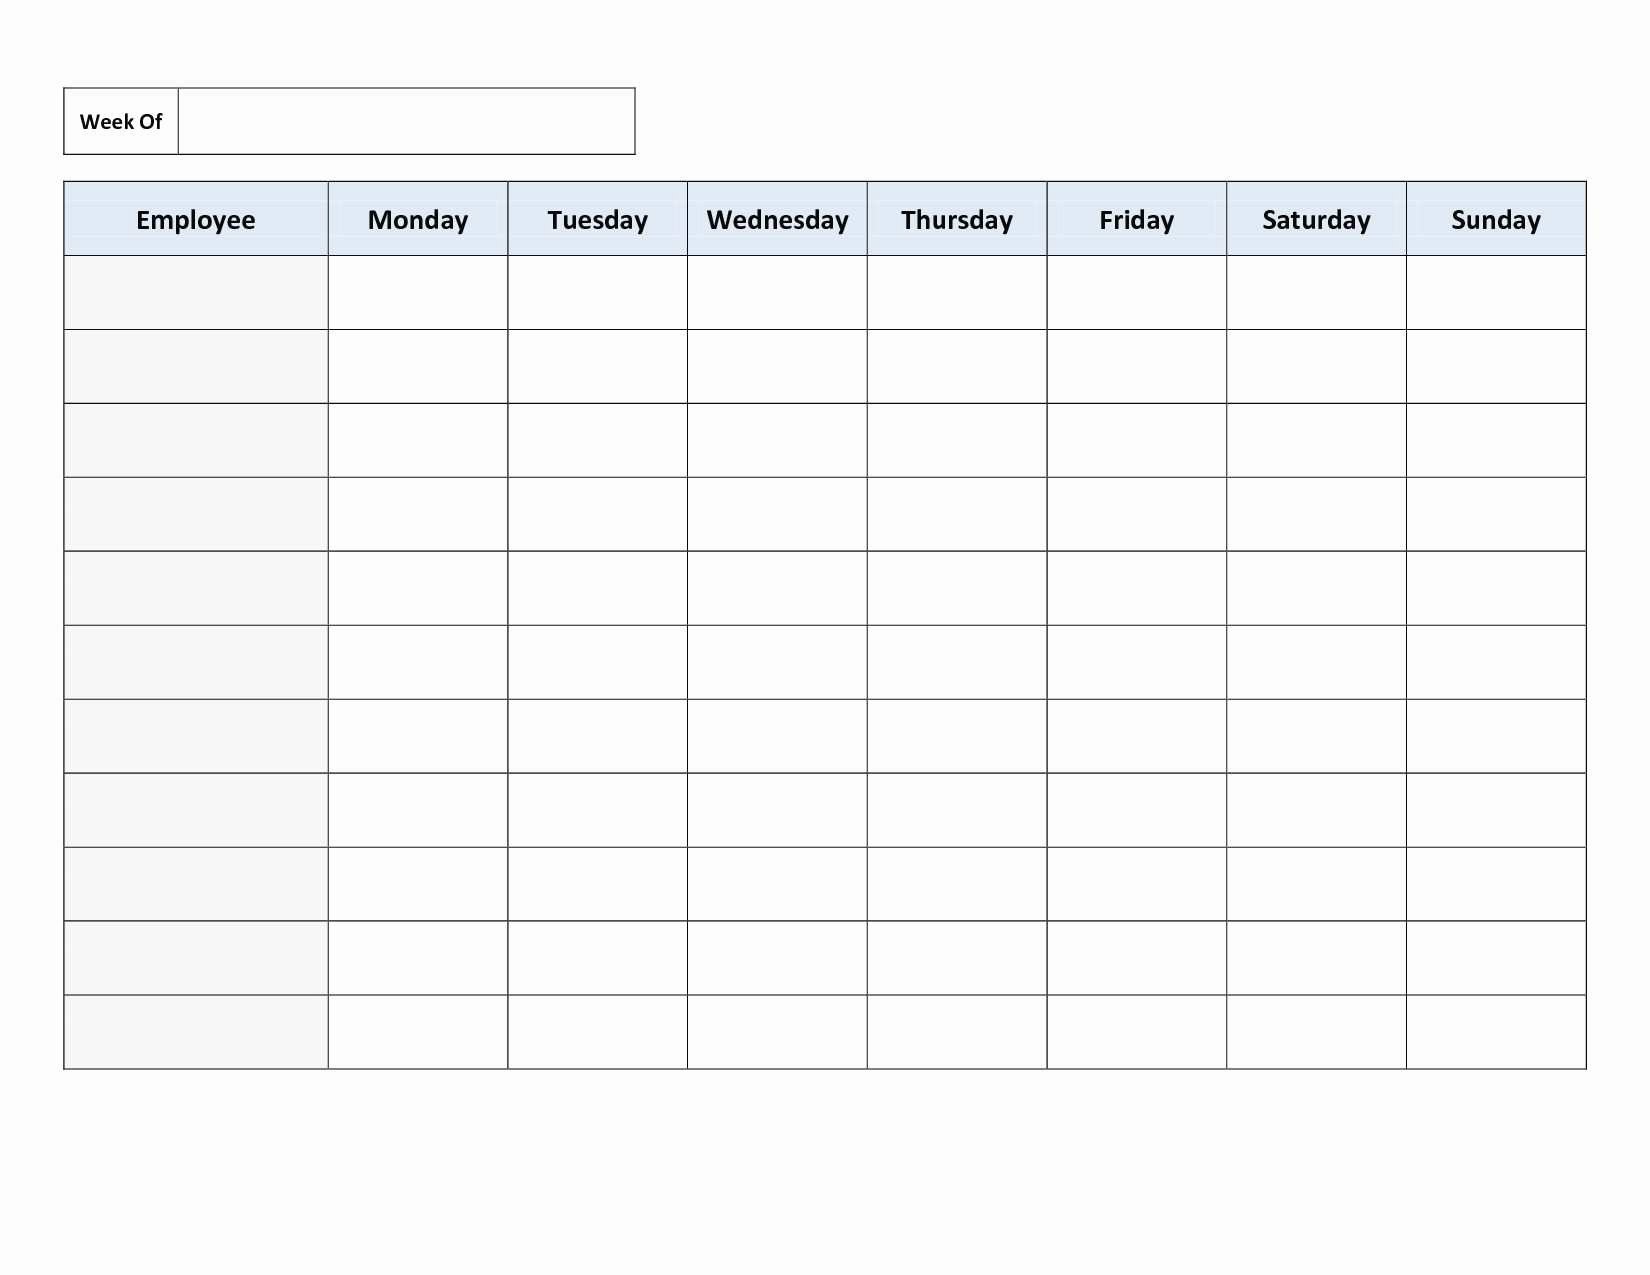 Employee Shift Scheduling Template Lovely Employee Shift Schedule Excel Template Download Elegant